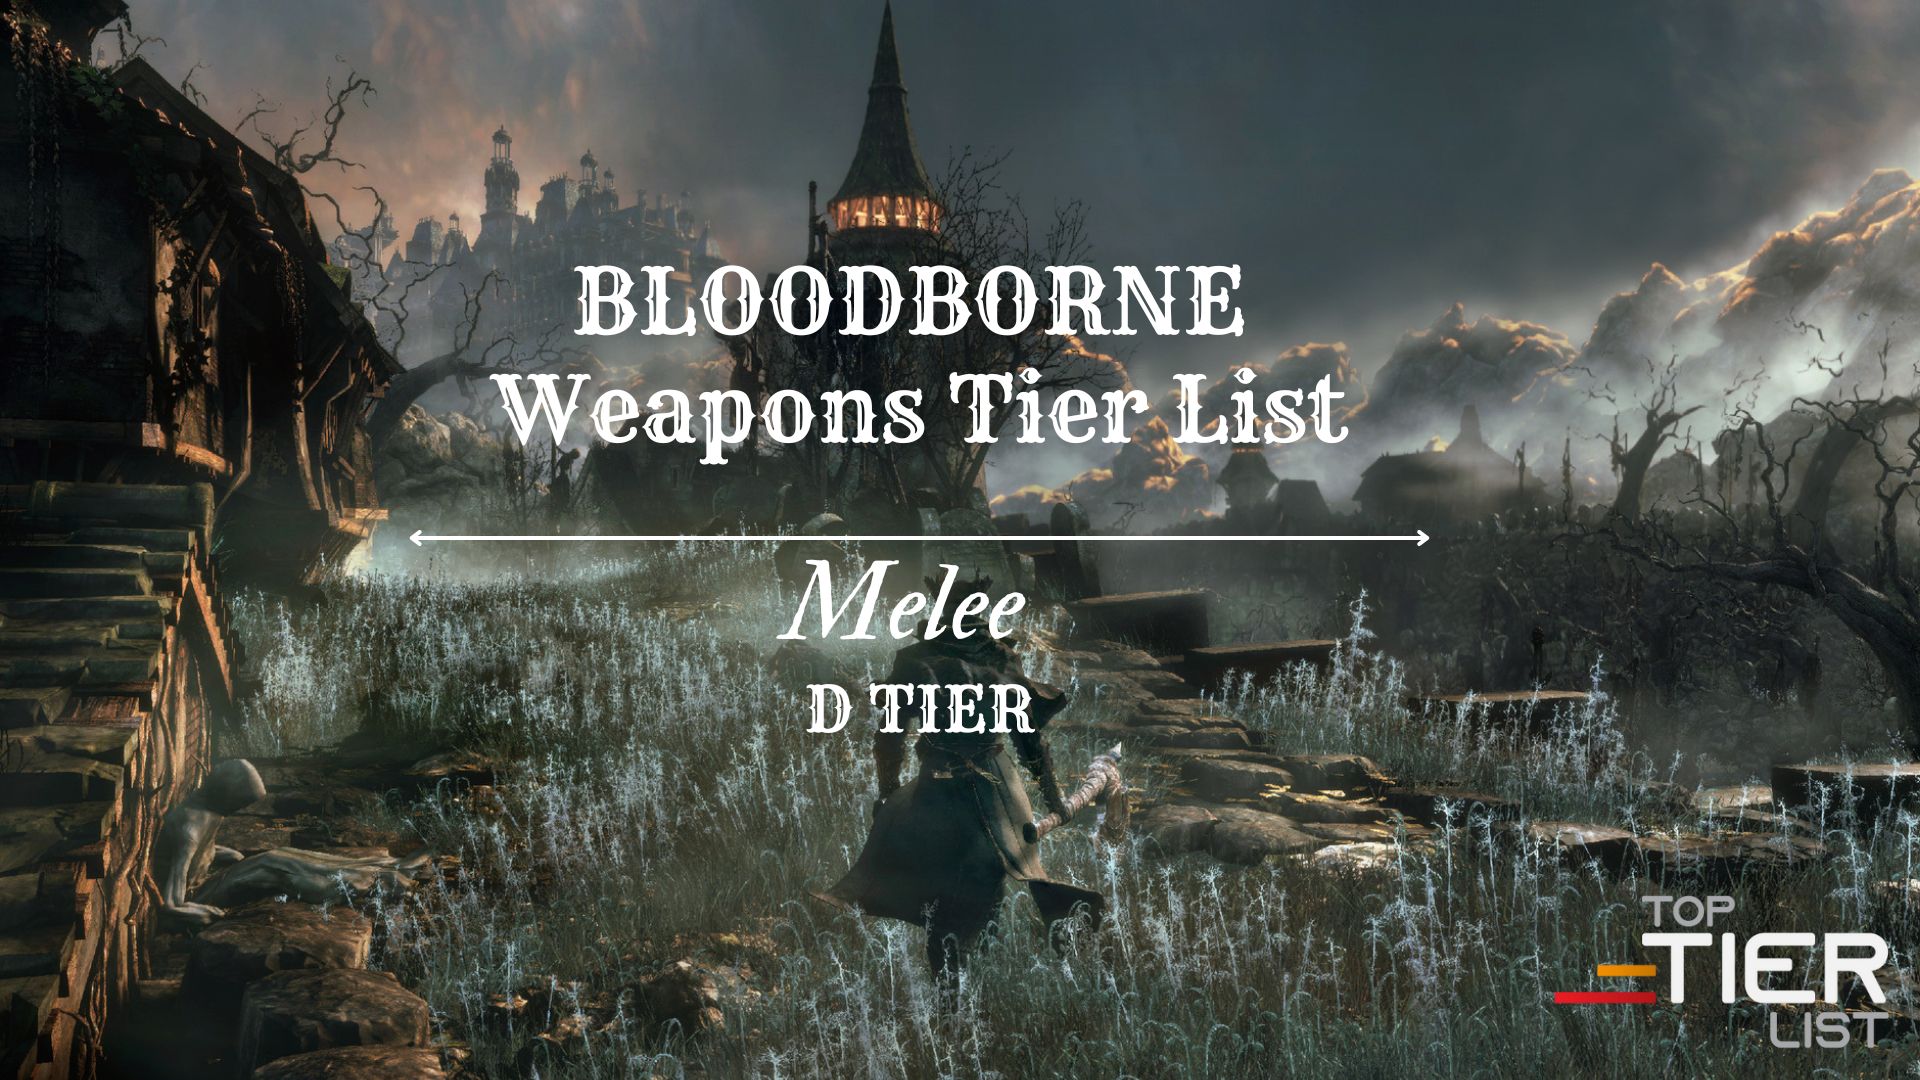 Bloodborne weapons tier list D tier of melee weapons